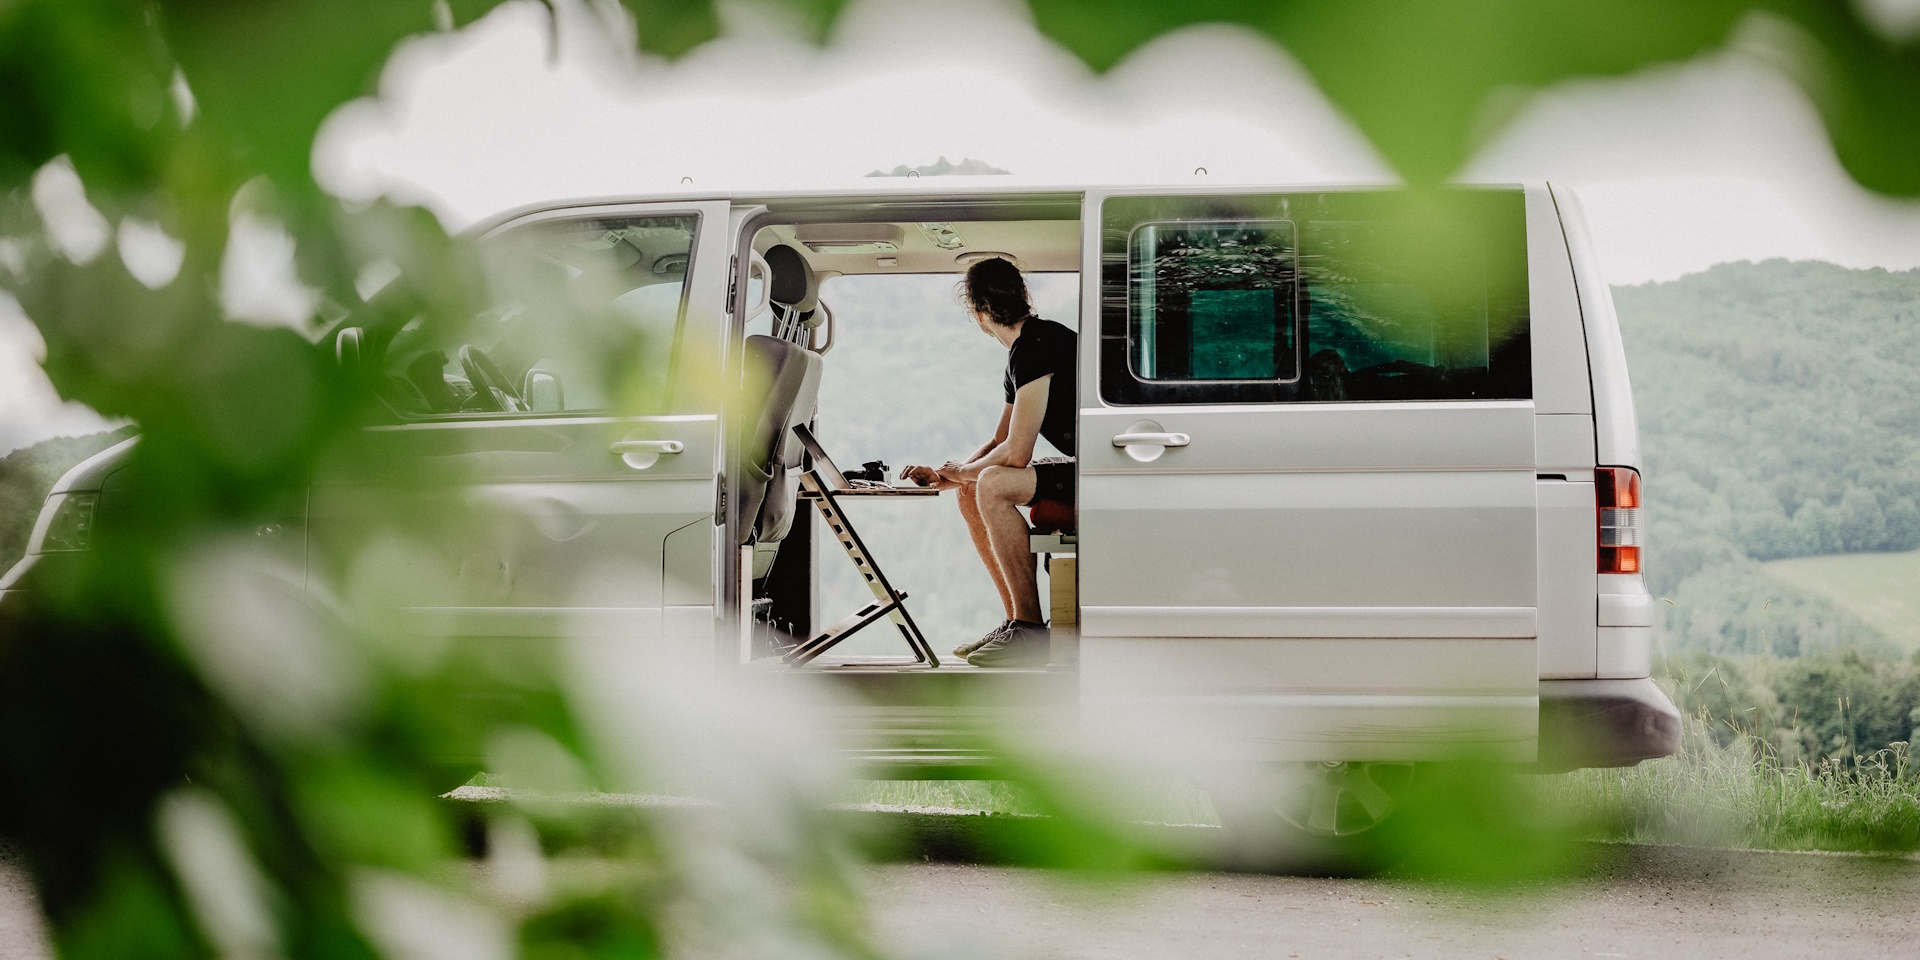 A man working remotely from his van in the middle of nature, using a foldable desk for his laptop